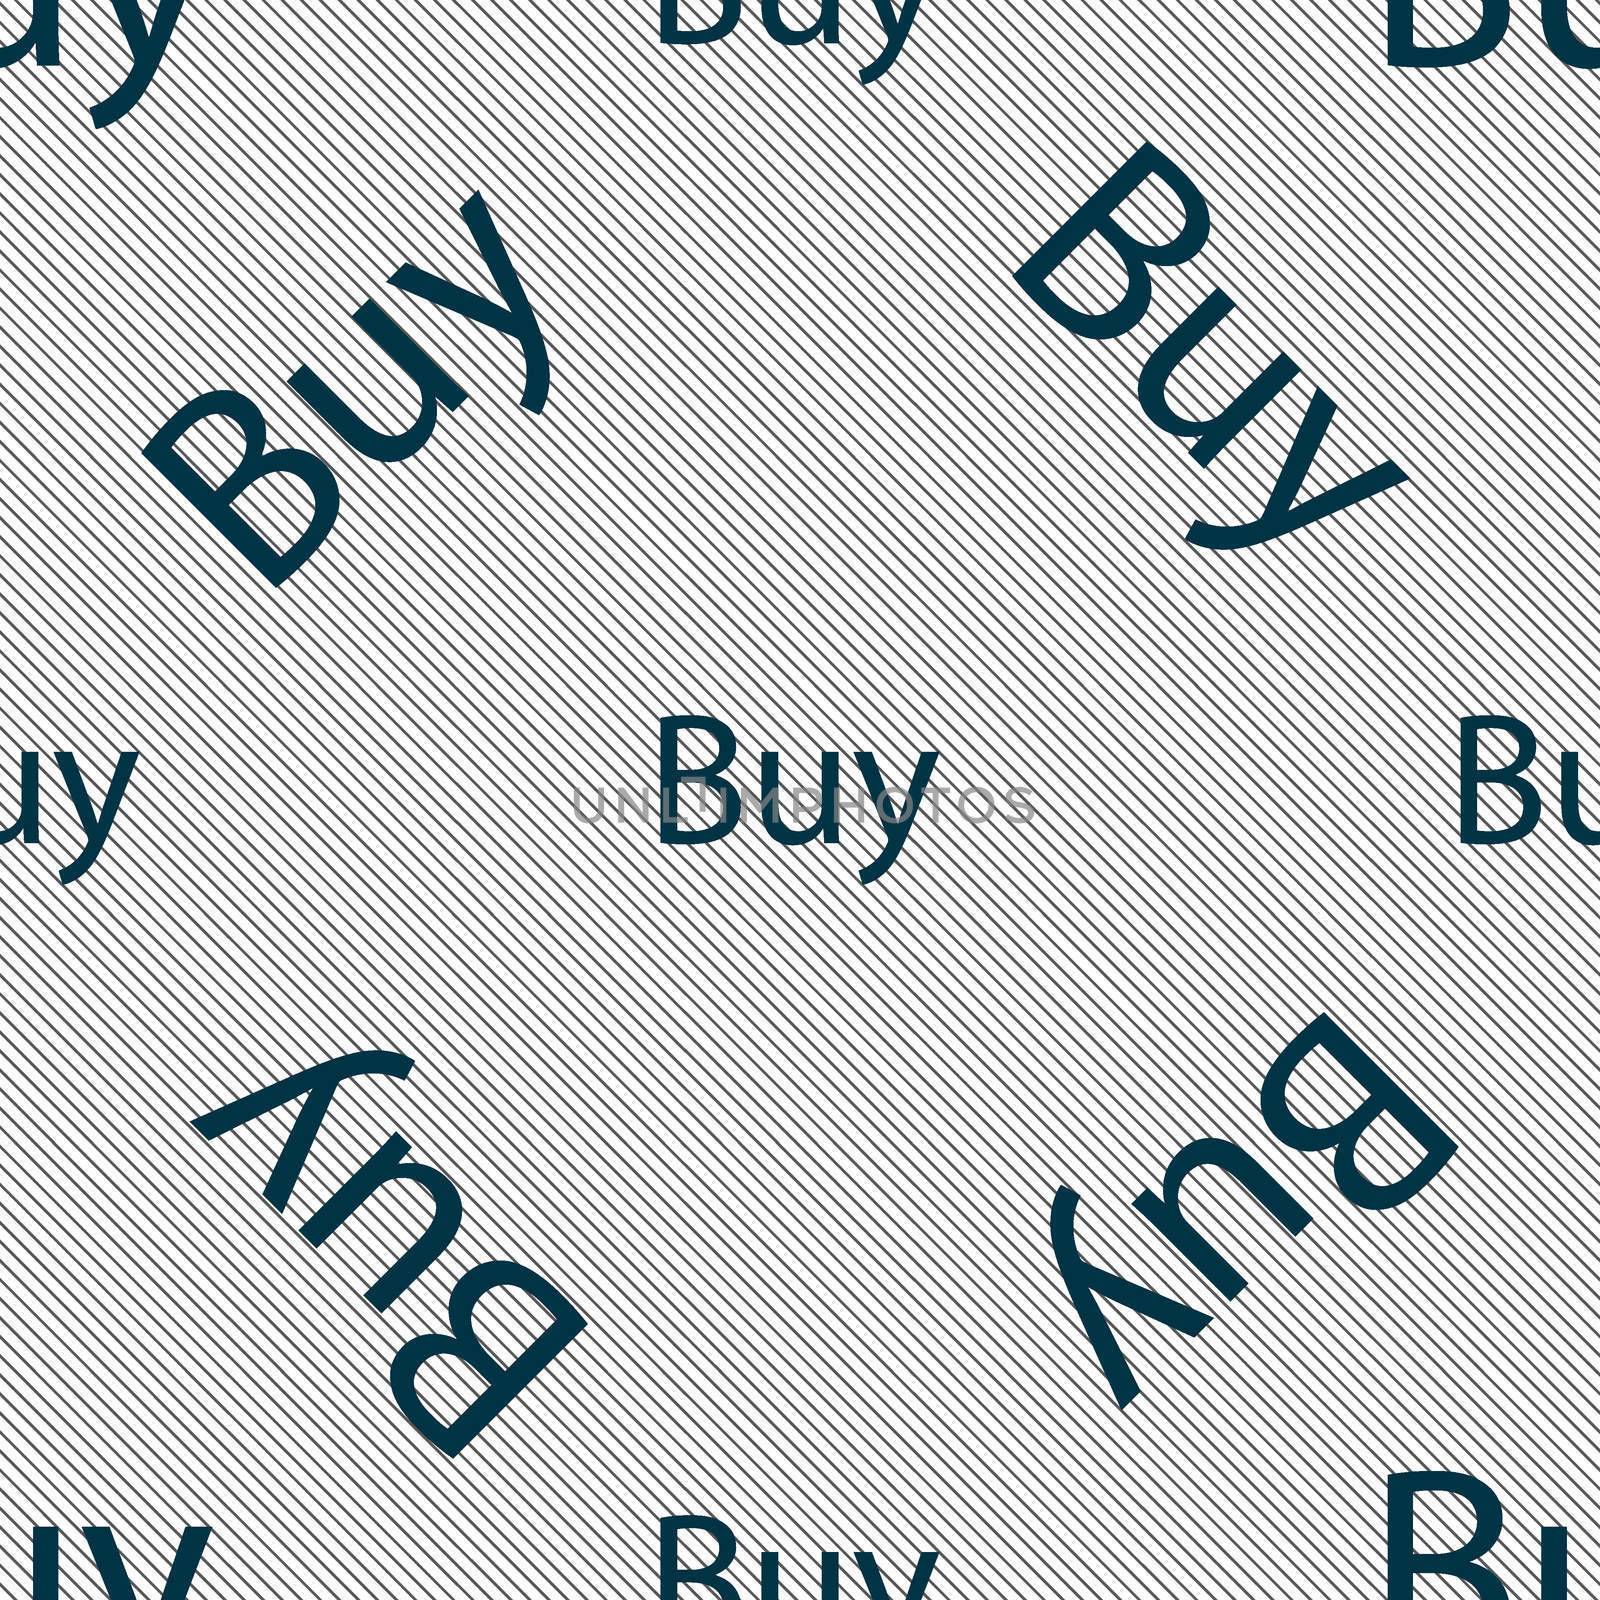 Buy sign icon. Online buying dollar usd button. Seamless pattern with geometric texture. illustration